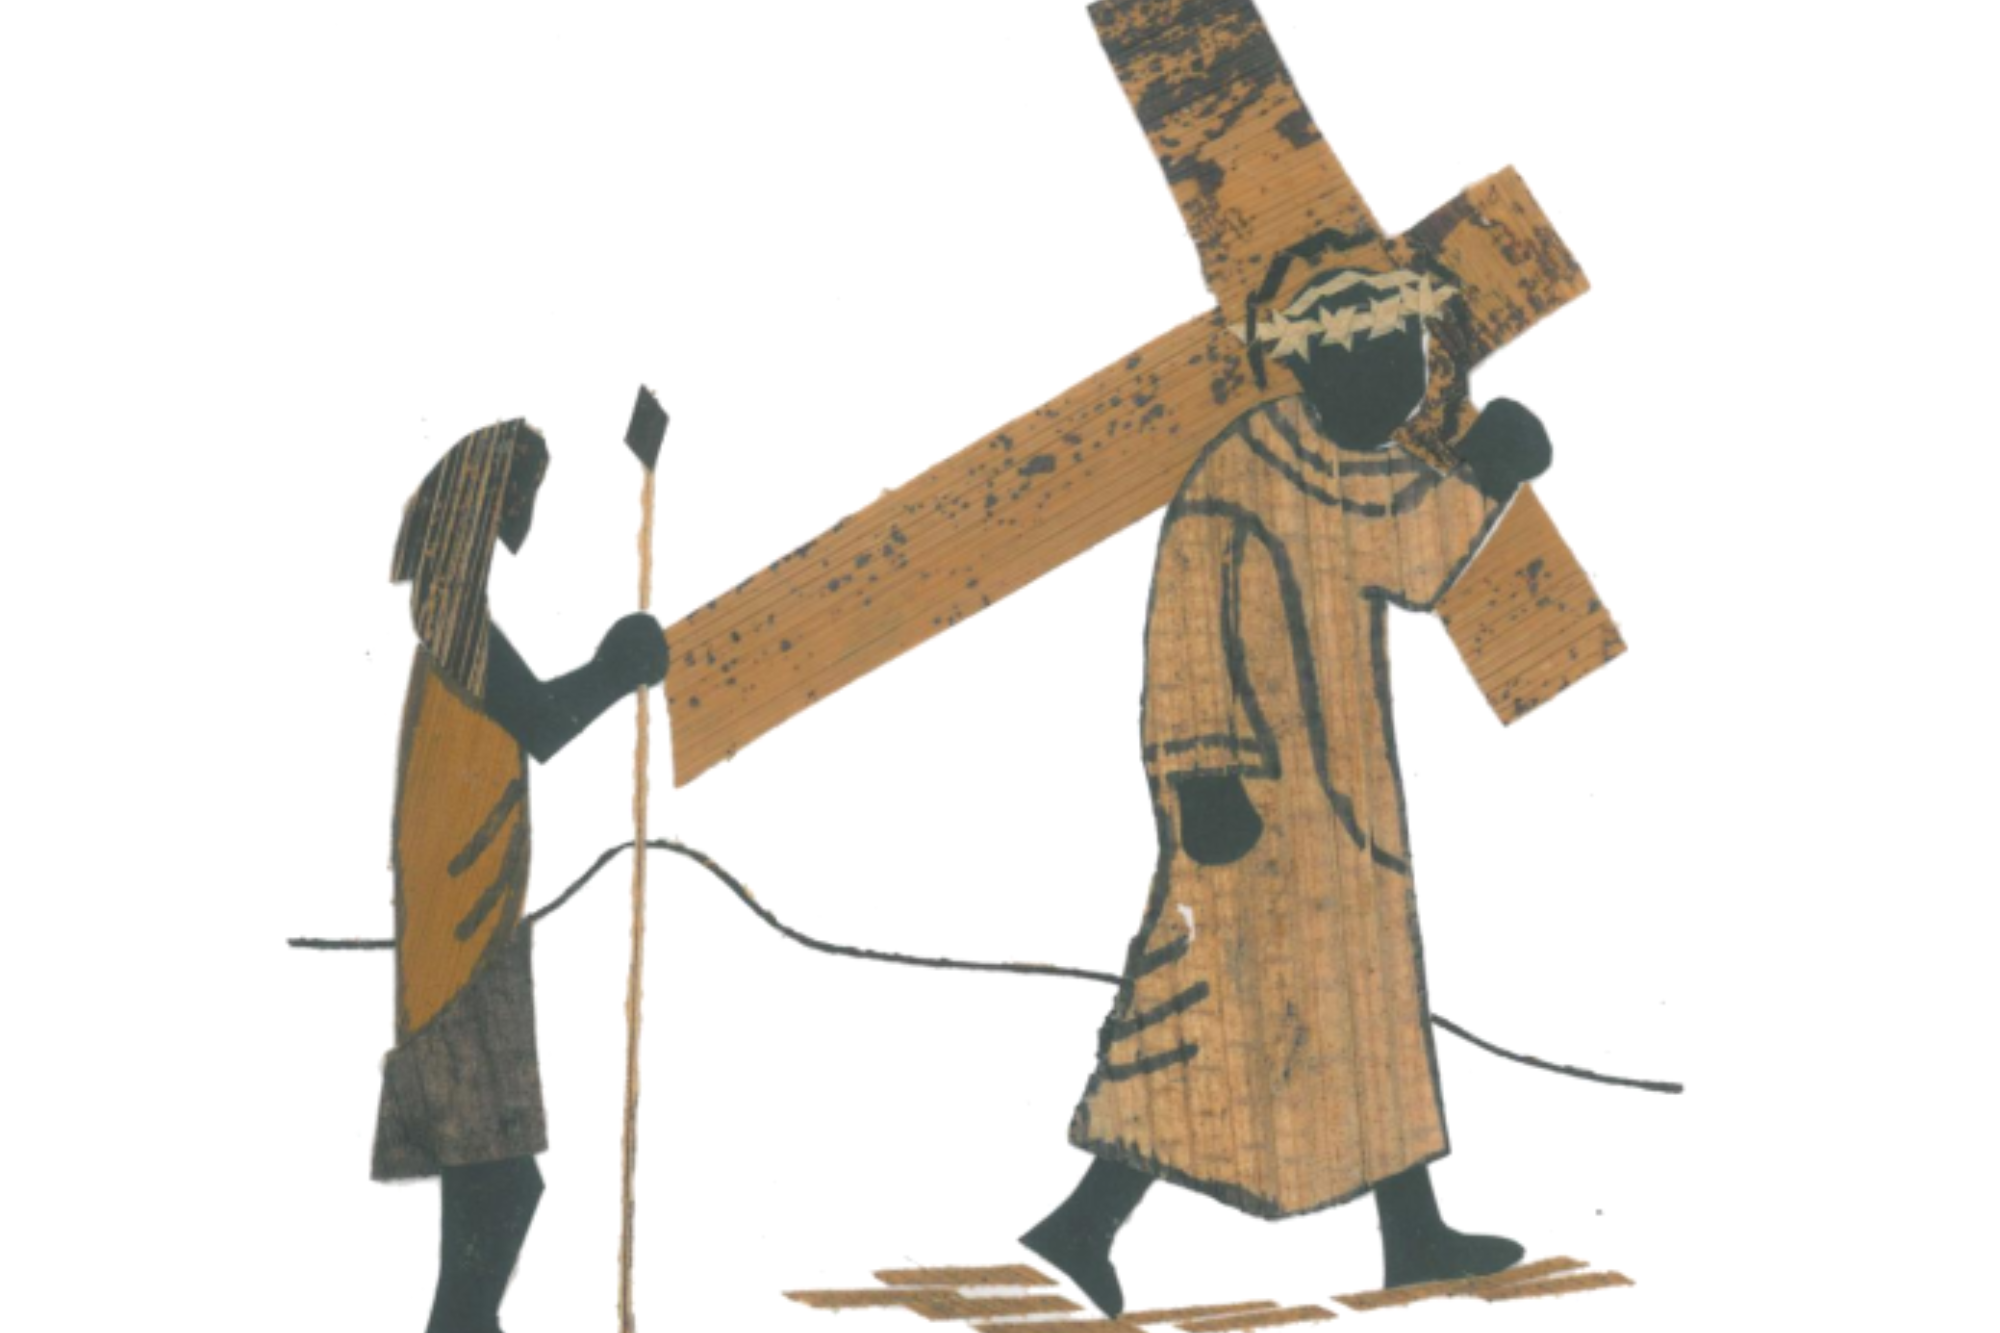 Join JRS UK for Stations of the Cross